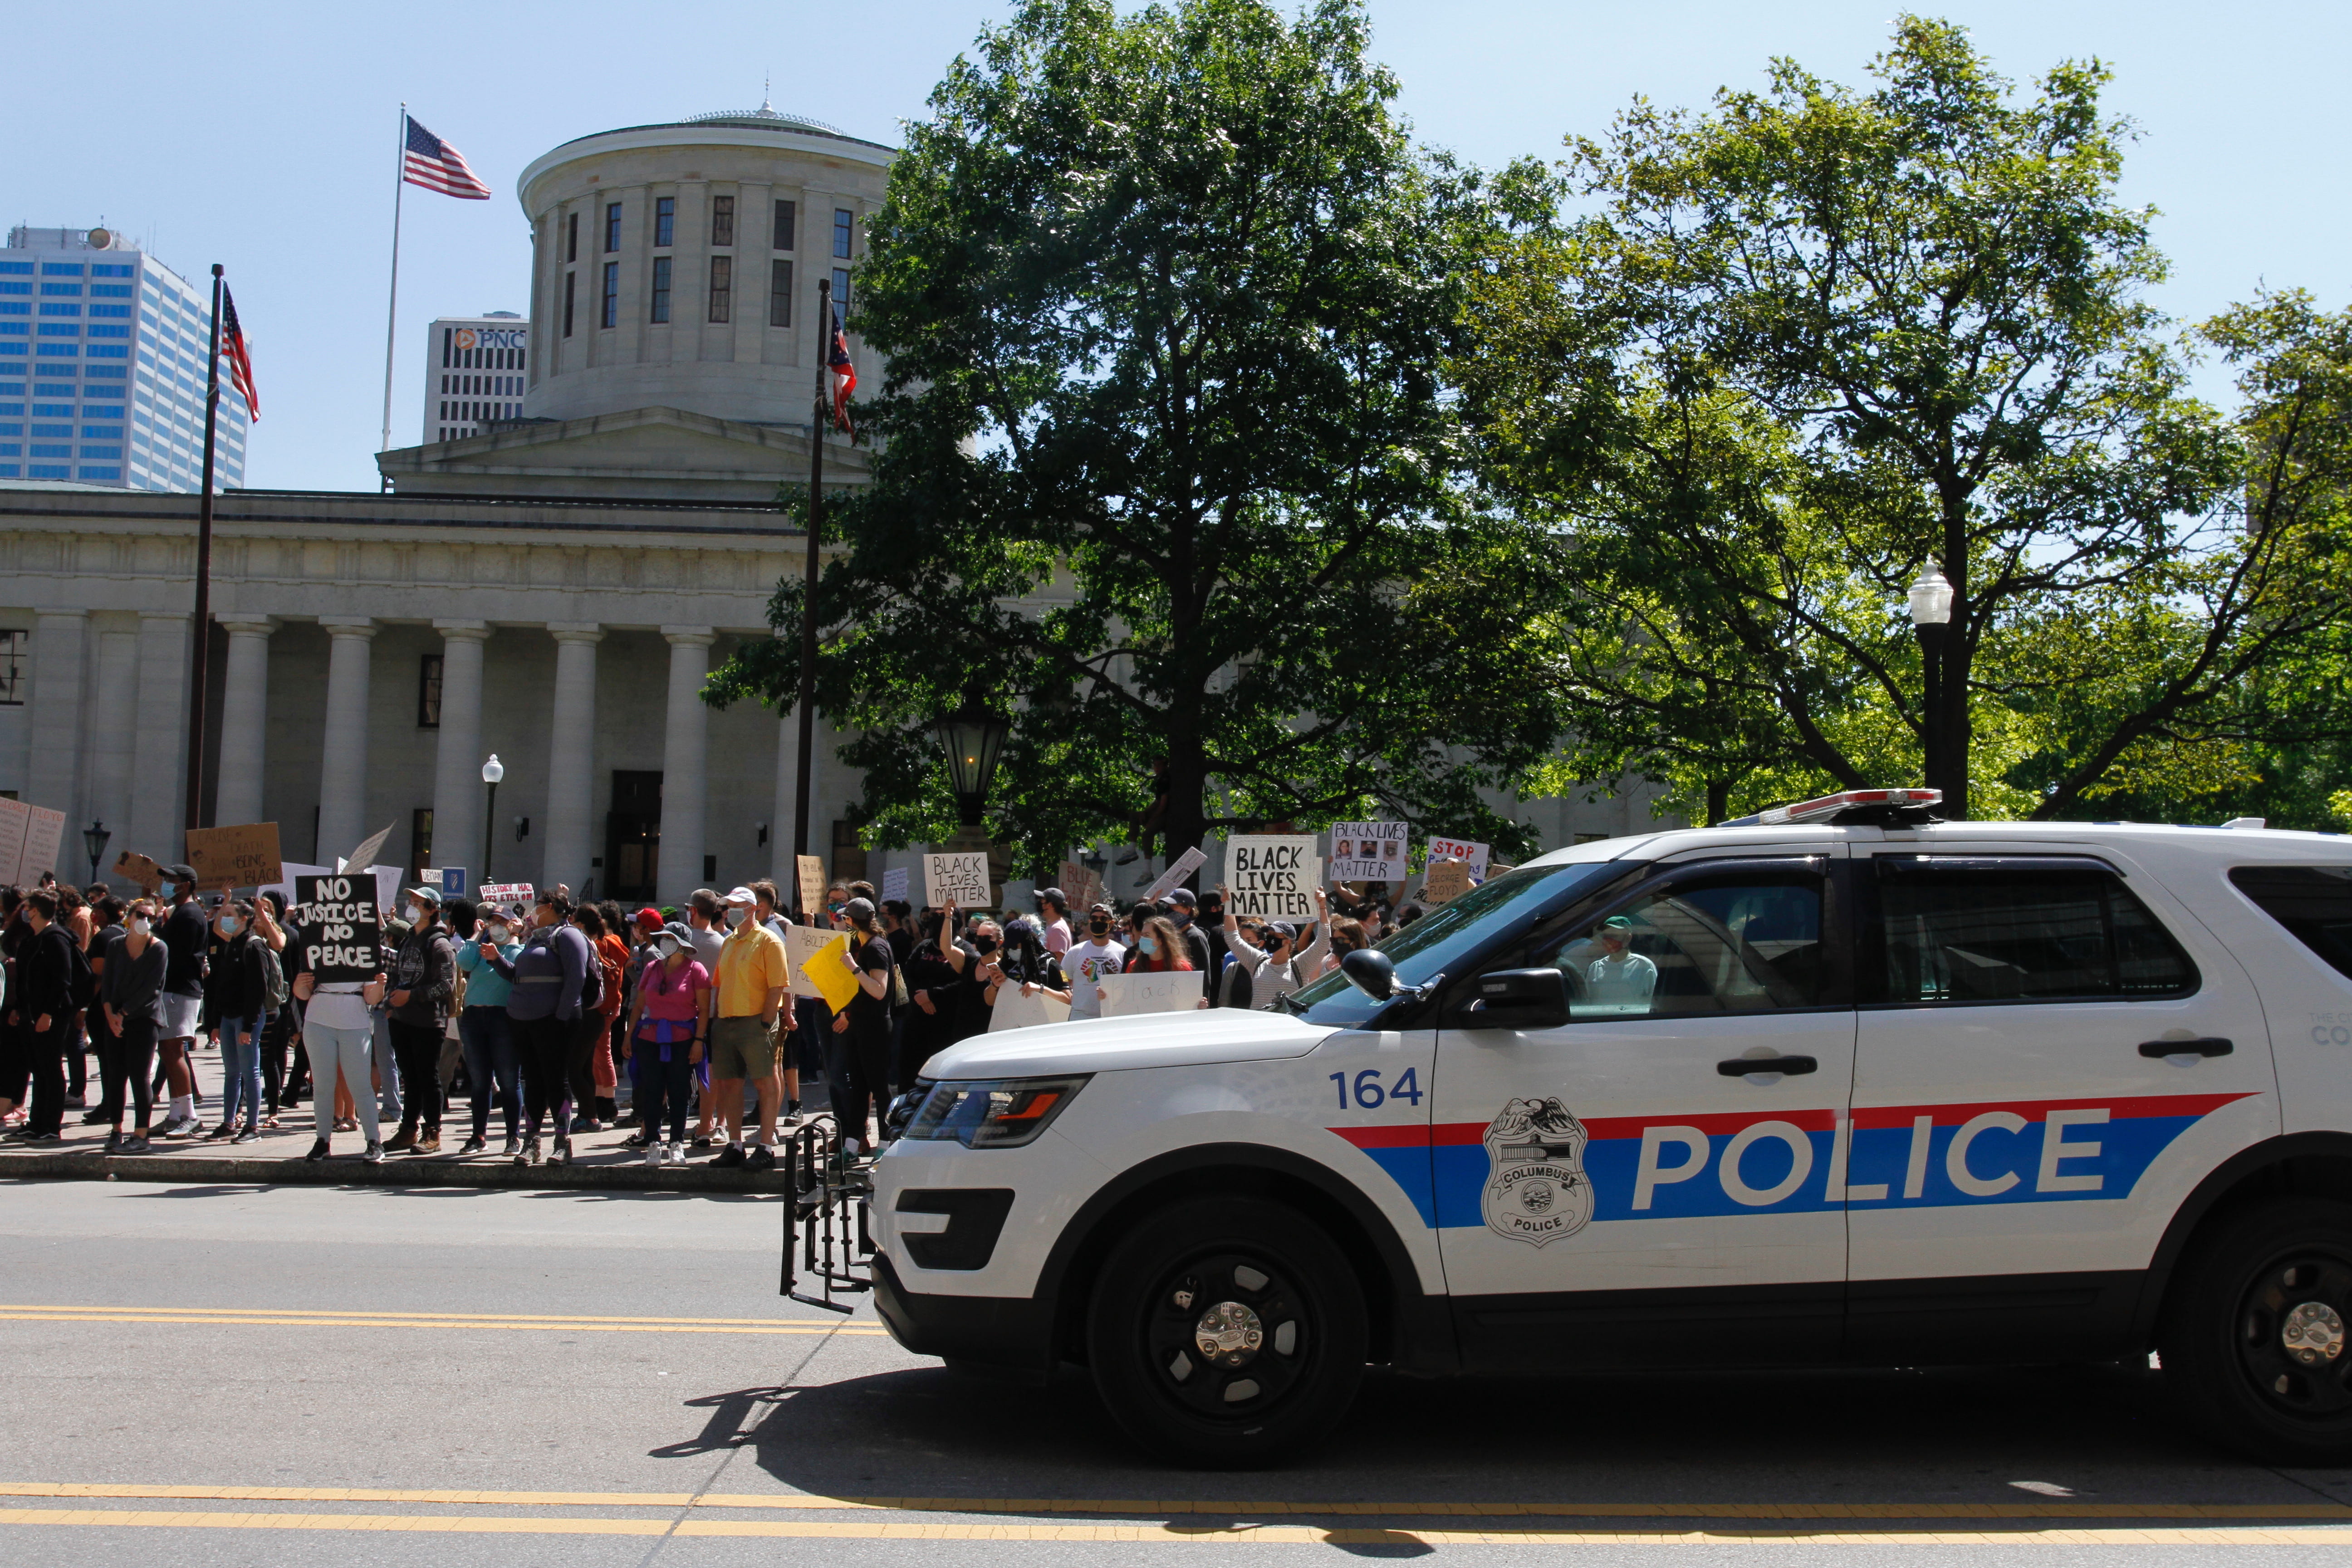 Columbus Police union looking to stop interviews regarding potential potential misconduct during summer protests